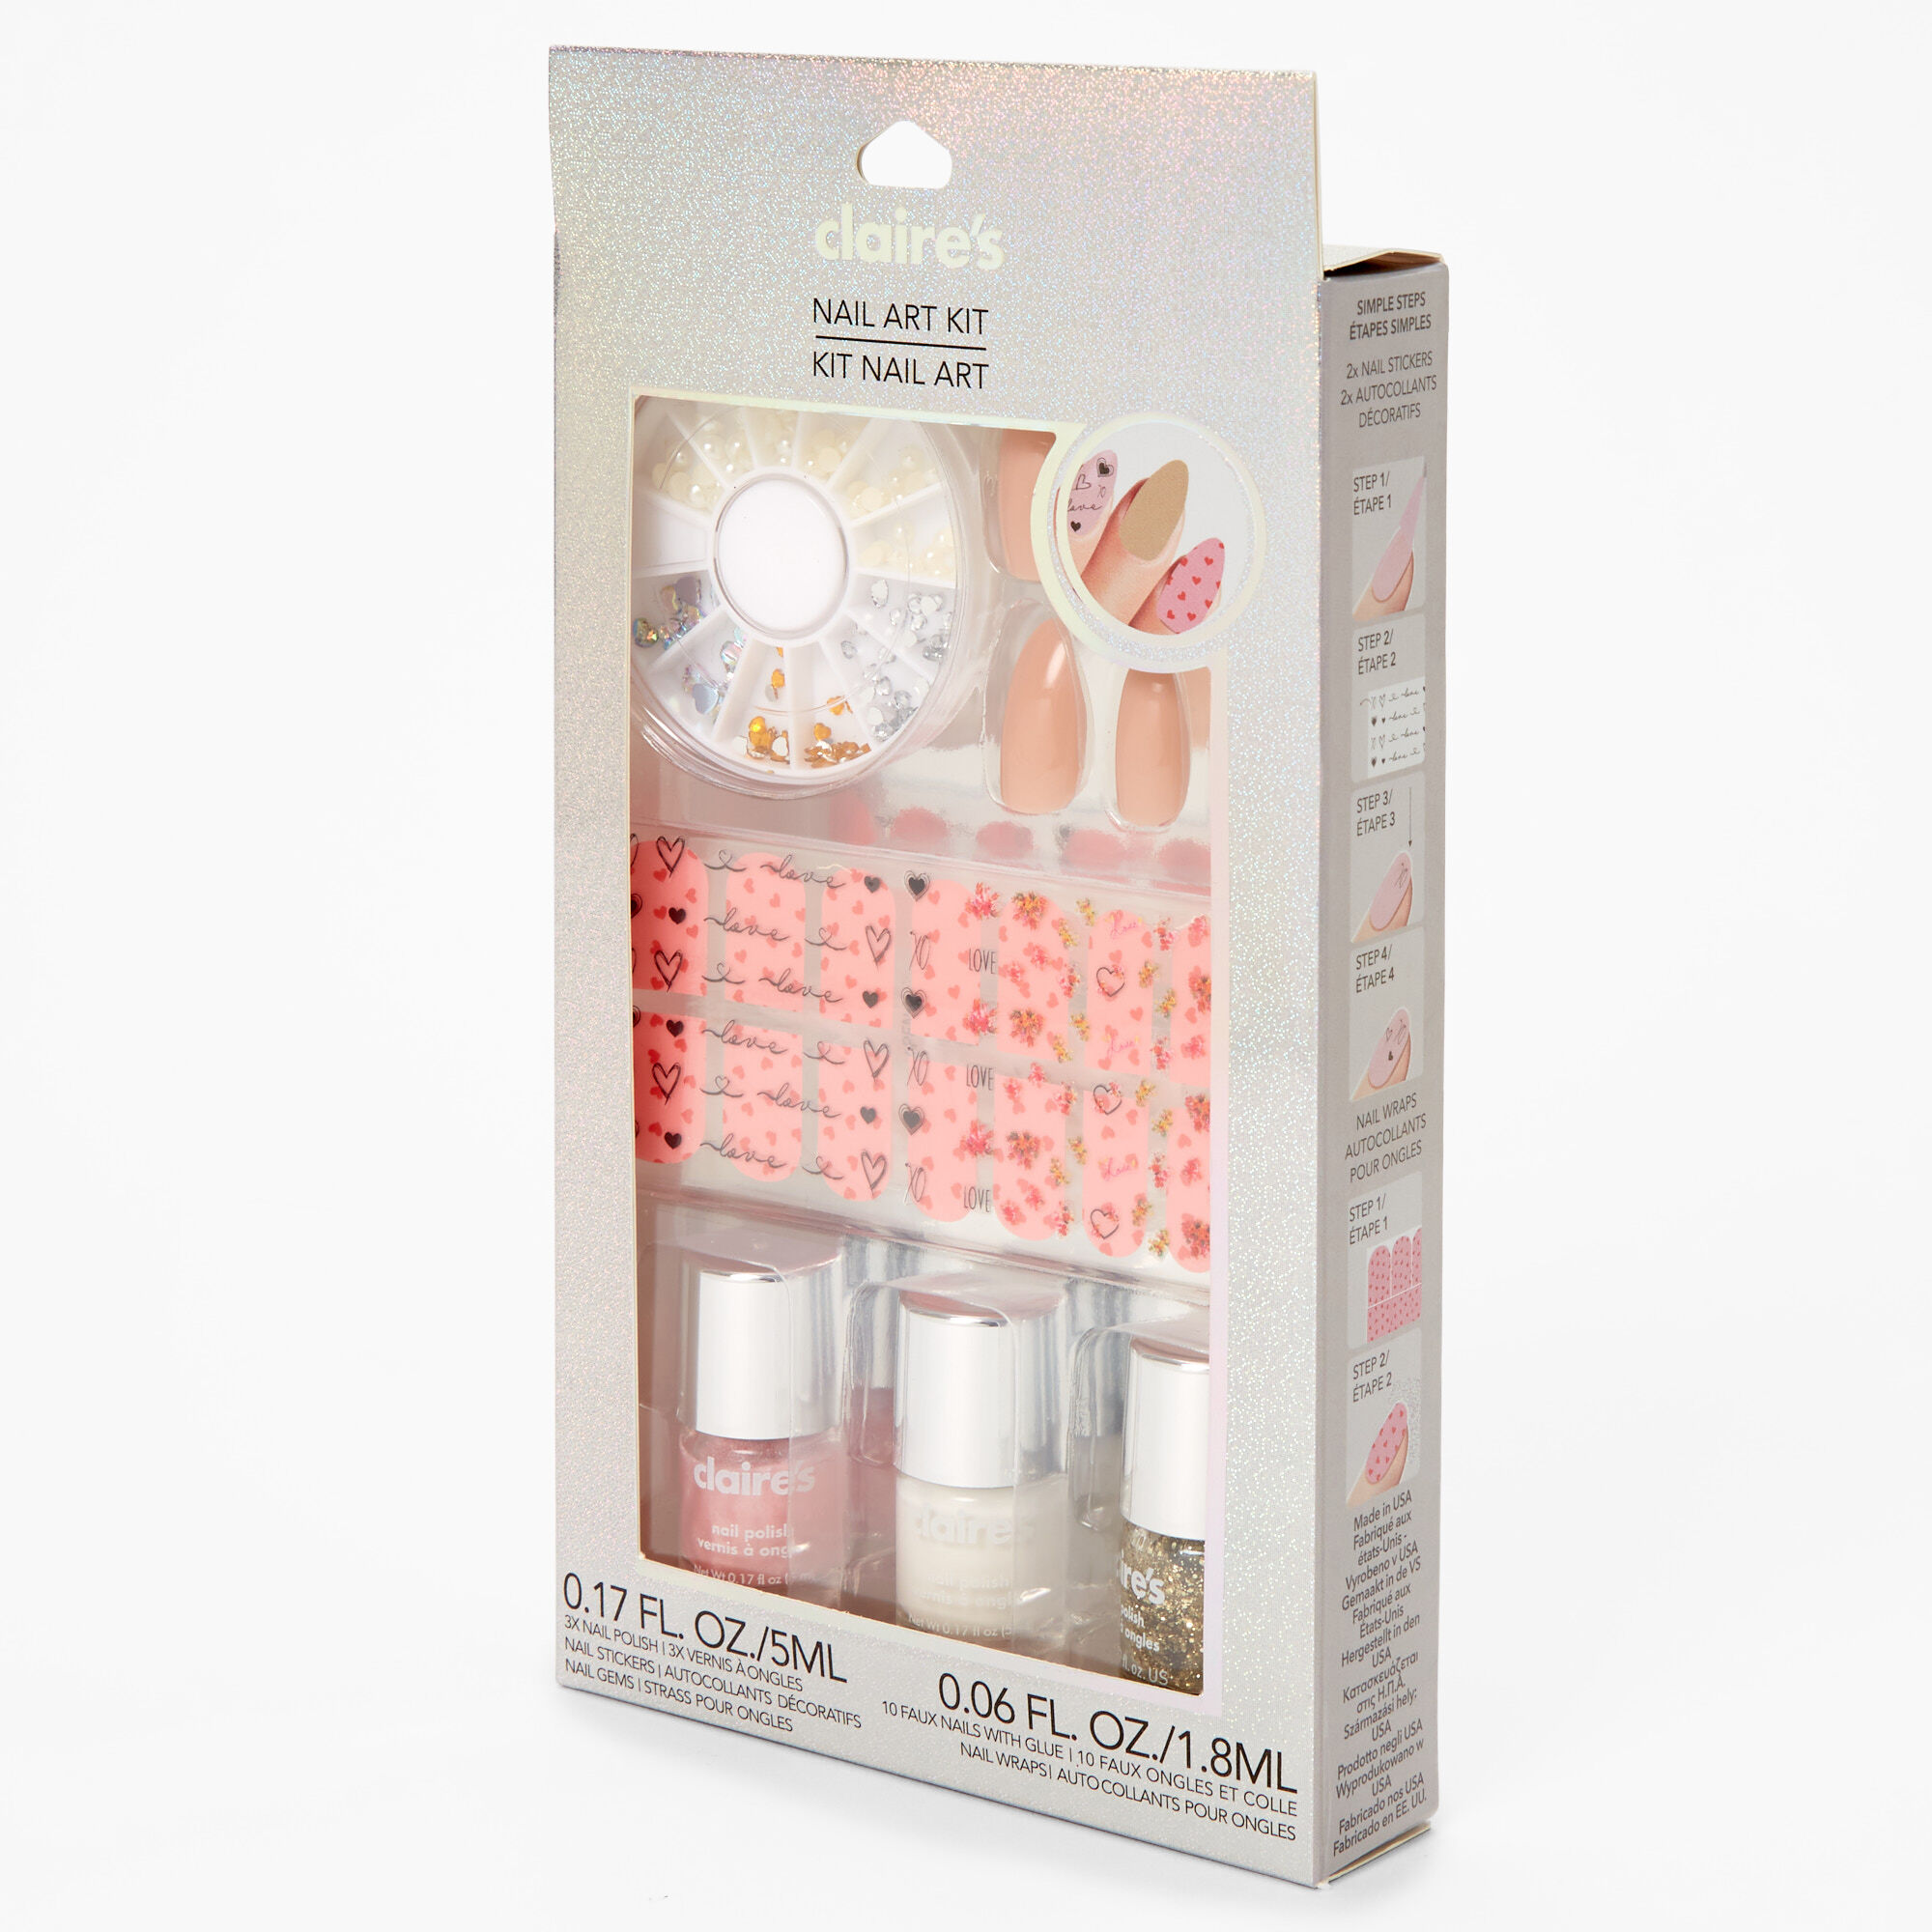 Claire's Nail Art Stamping Kit Review